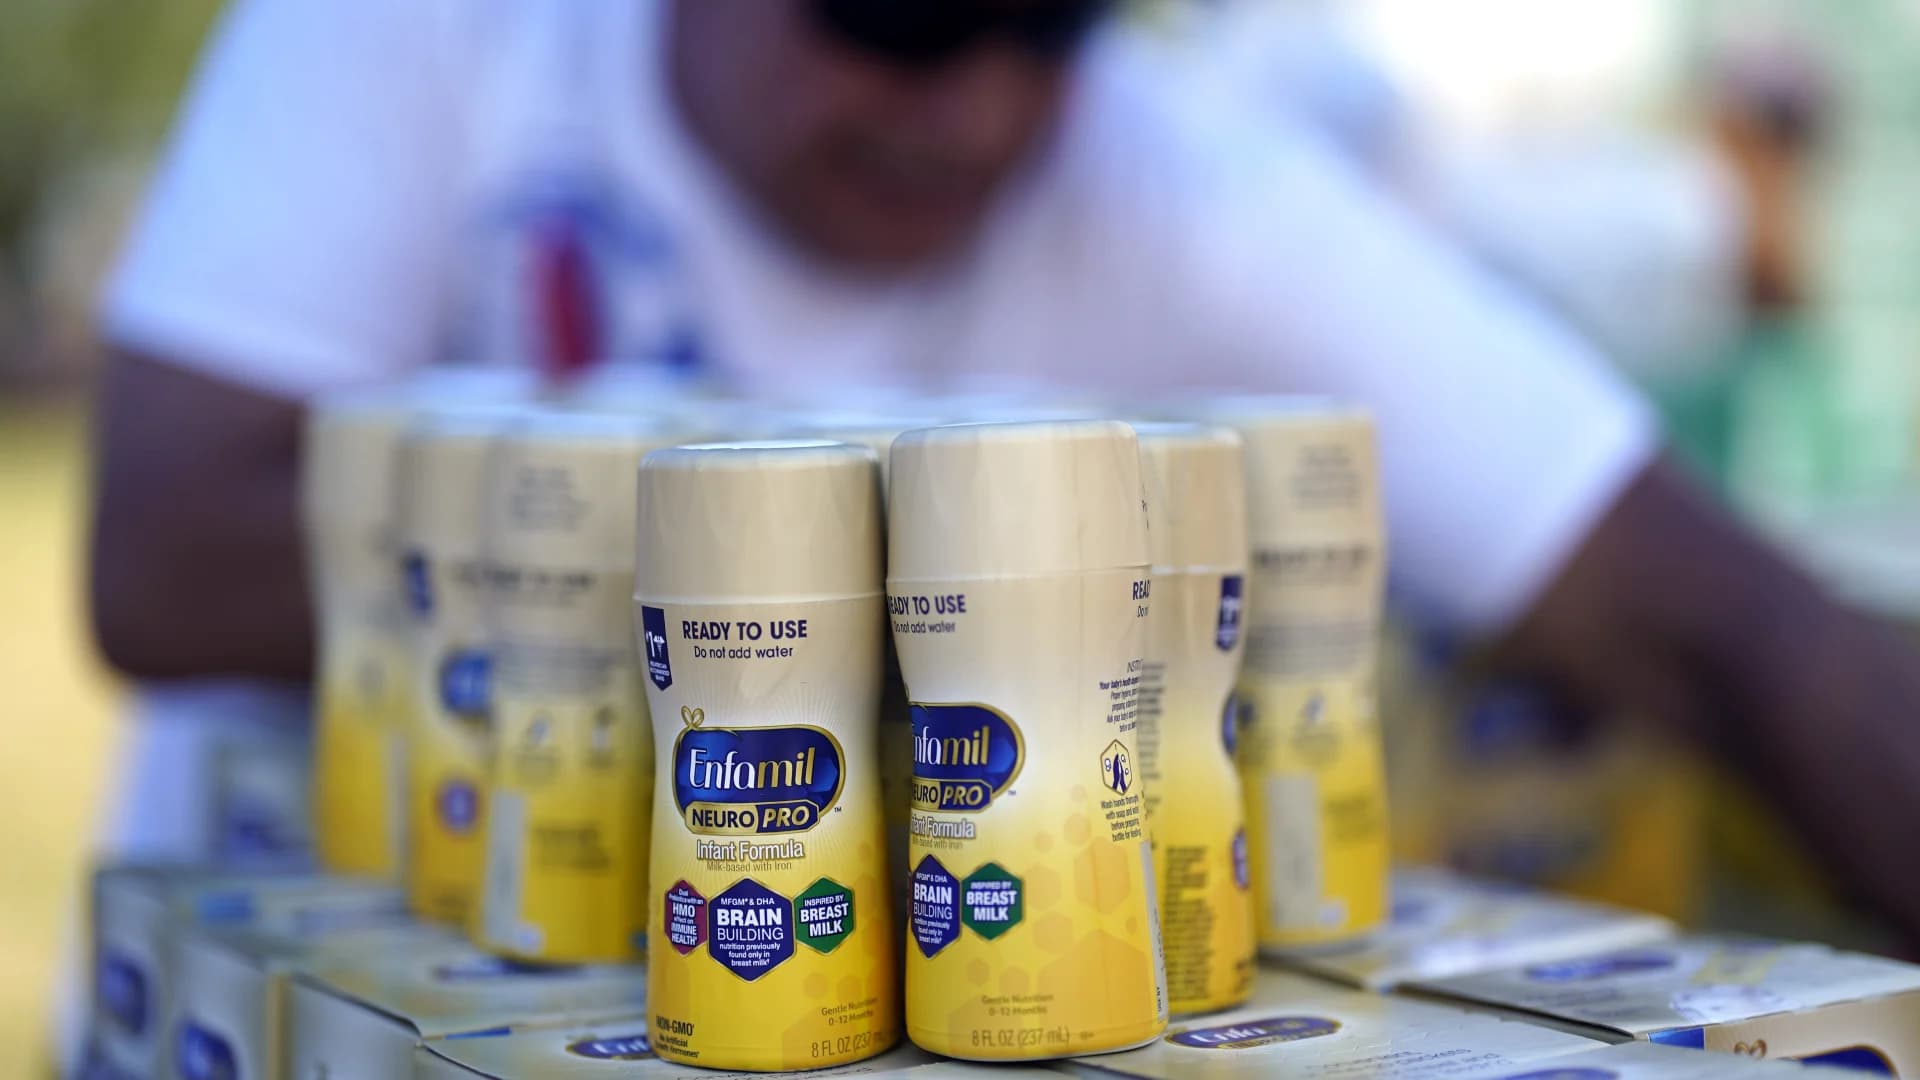 US importing equivalent of about 16 million 8-ounce baby formula bottles from Mexico to ease shortage